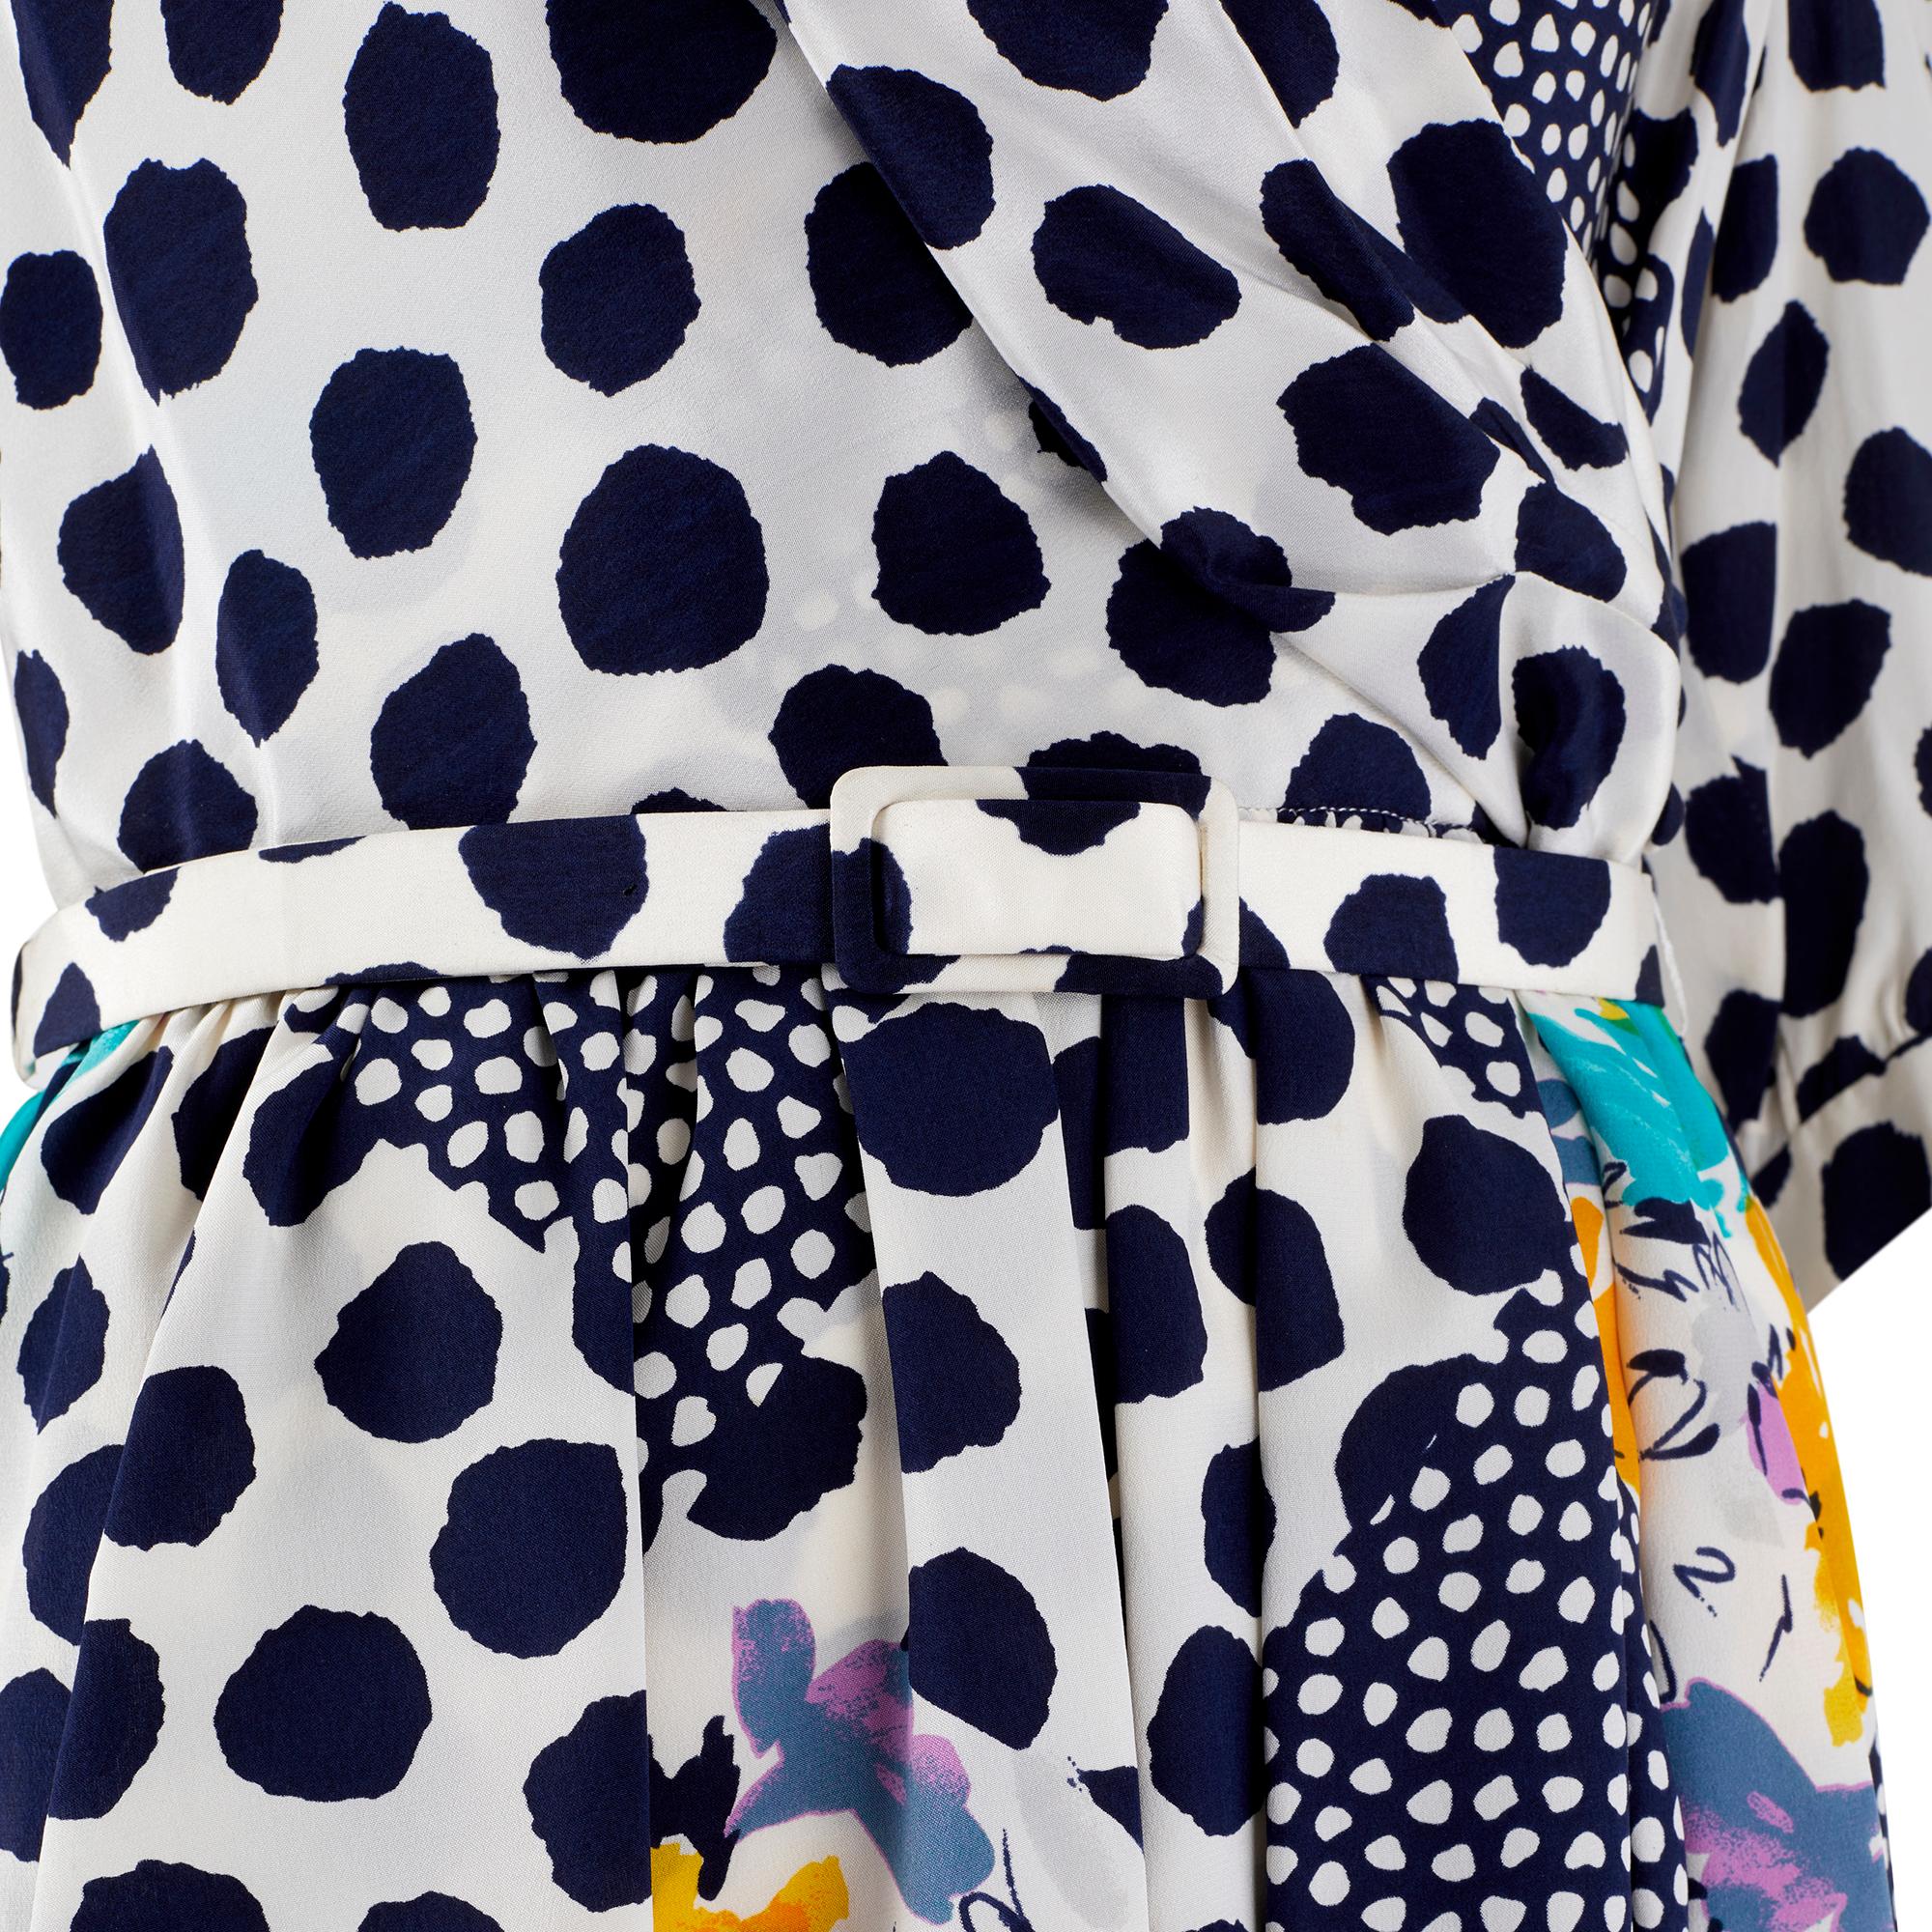 Women's 1980s Navy and White Polka Dot and Floral Dress